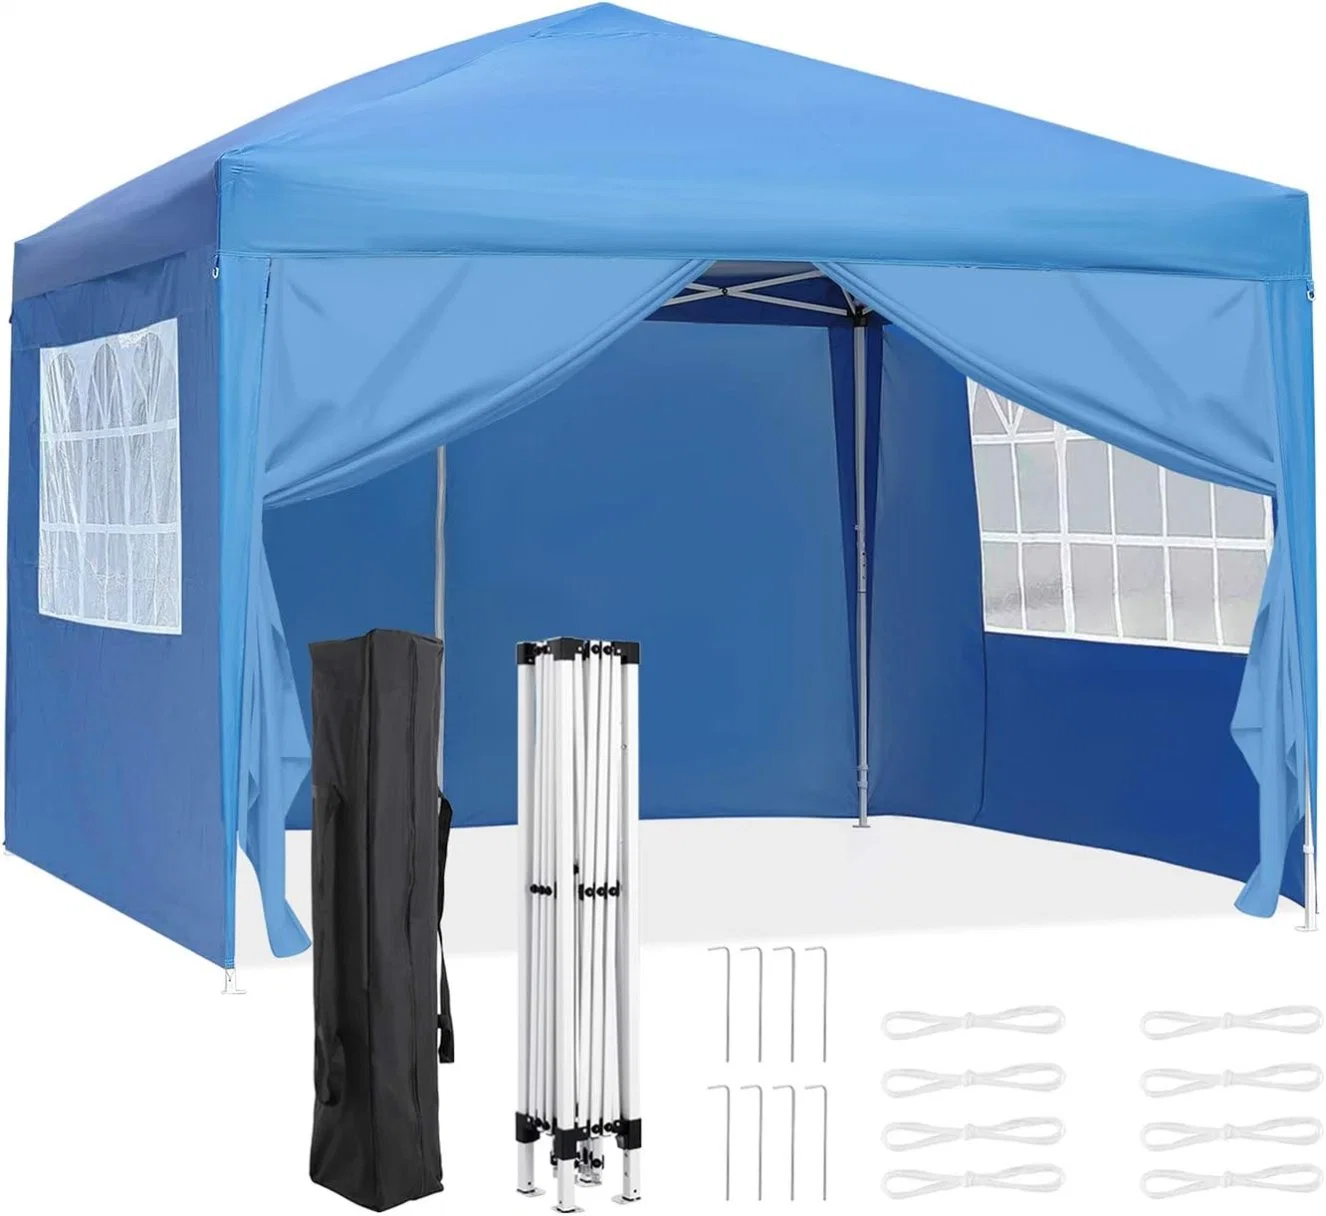 Outdoor Durable Waterproof Iron Pole Cheapest Price Small Size 3X3m Gazebo Tent